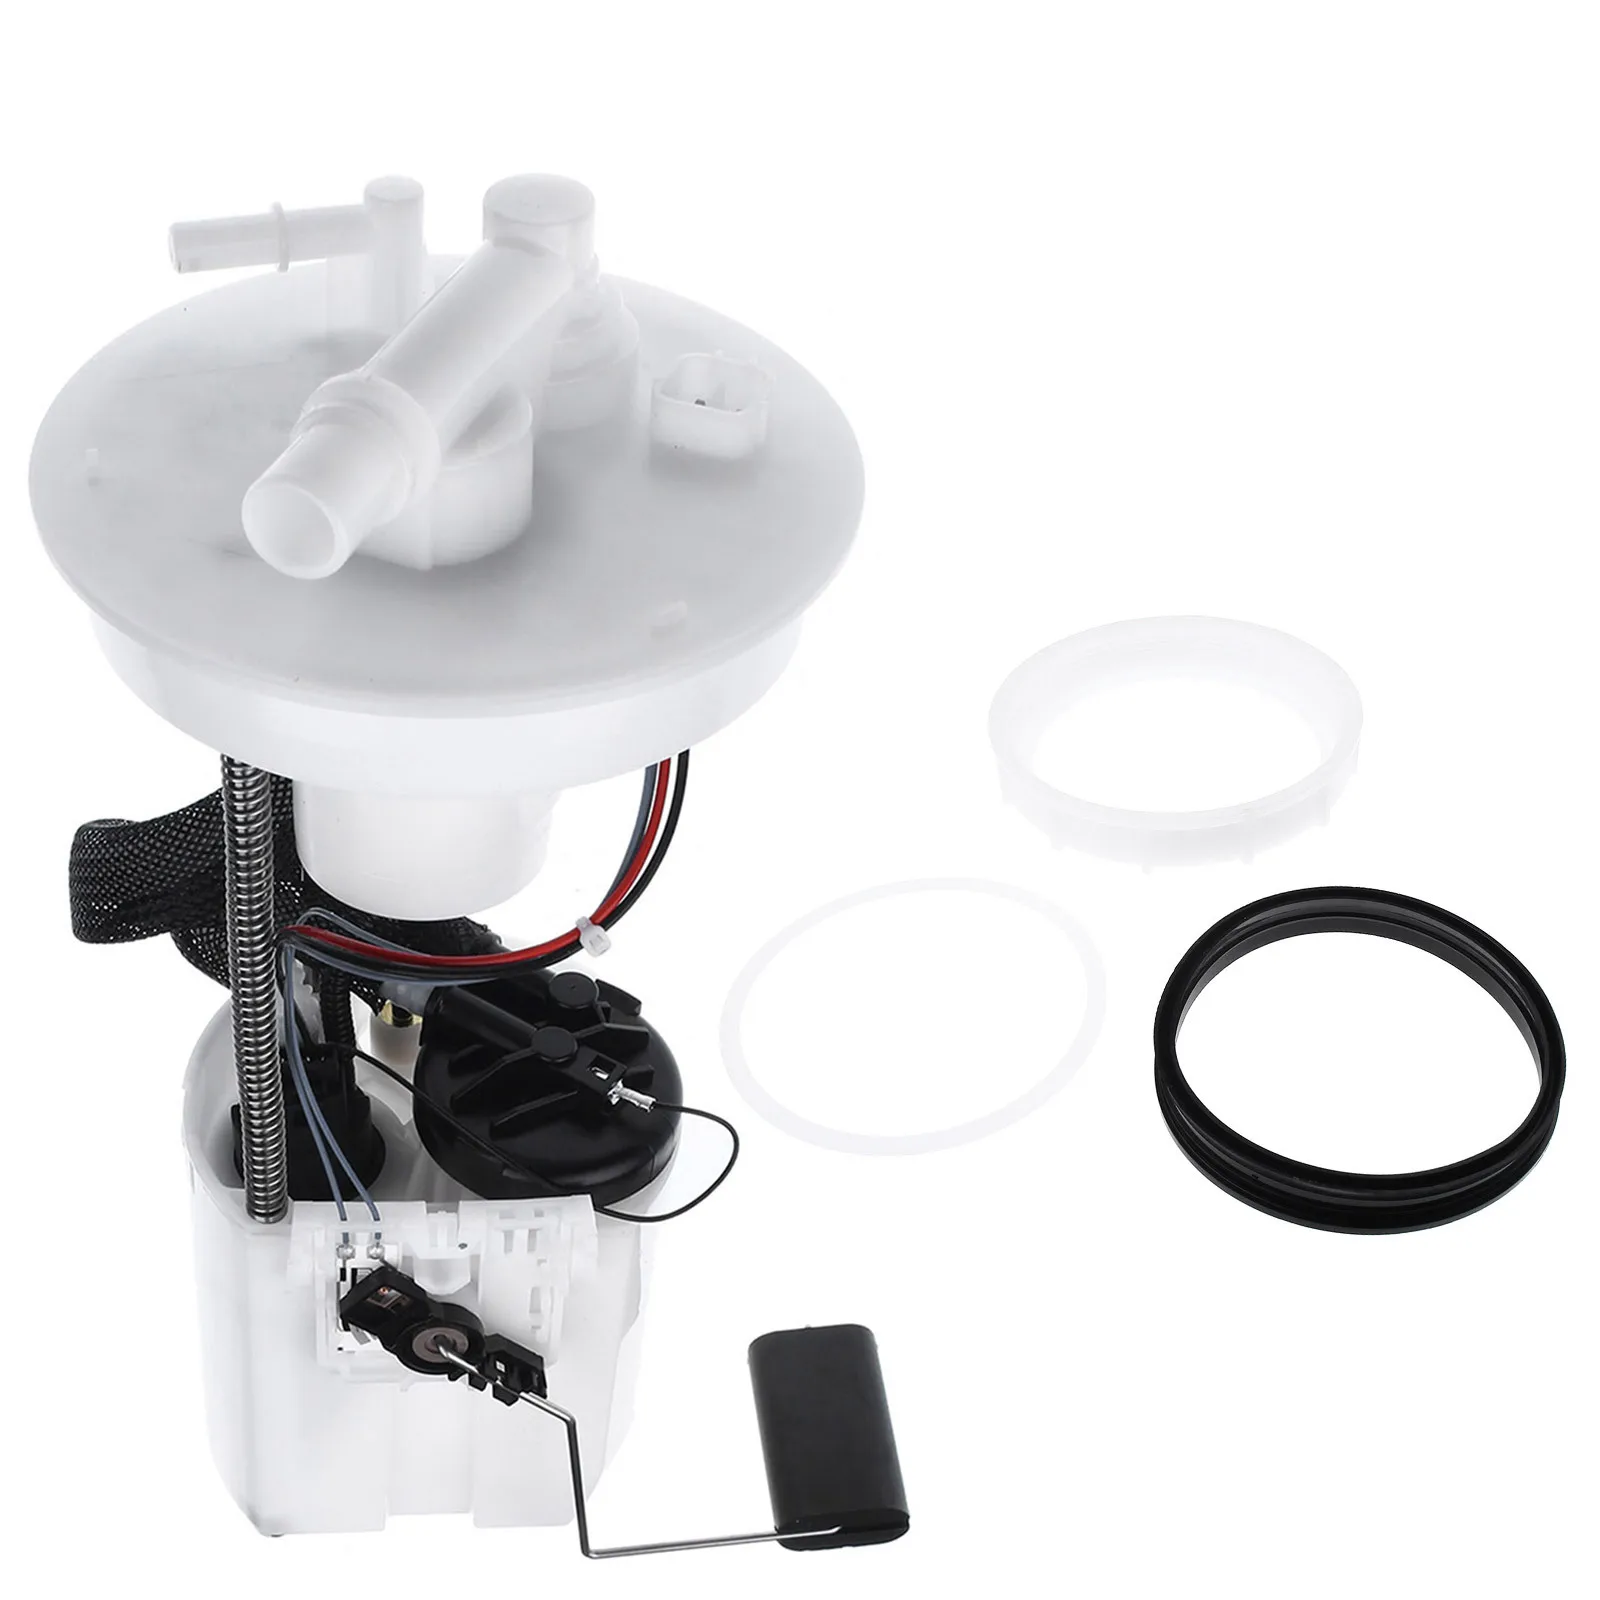 

In-stock CN US Fuel Pump Module Assembly for Honda Civic L4 2.0L 2006-2011 Naturally Aspirated 17045SVBA31